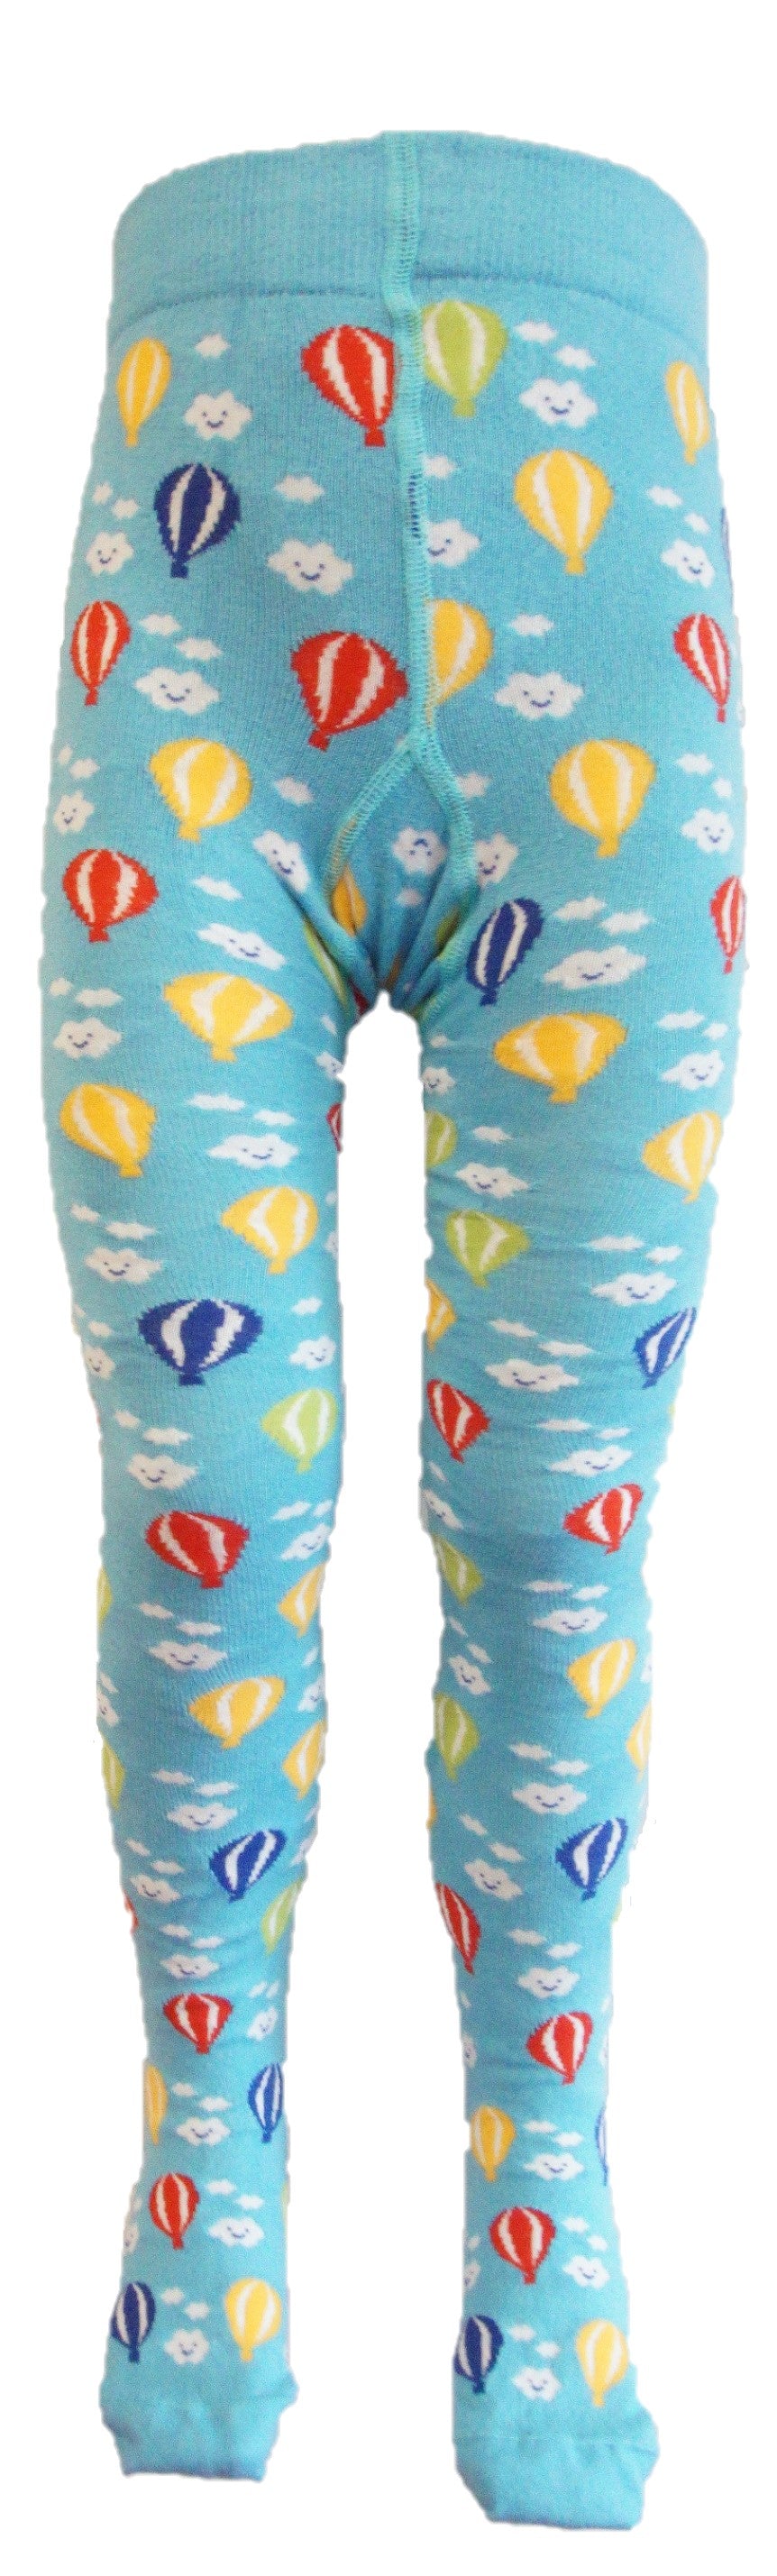 Slugs and Snails - Tights Air Balloons - Maillot Turquoise Blauw met Luchtbalonnen